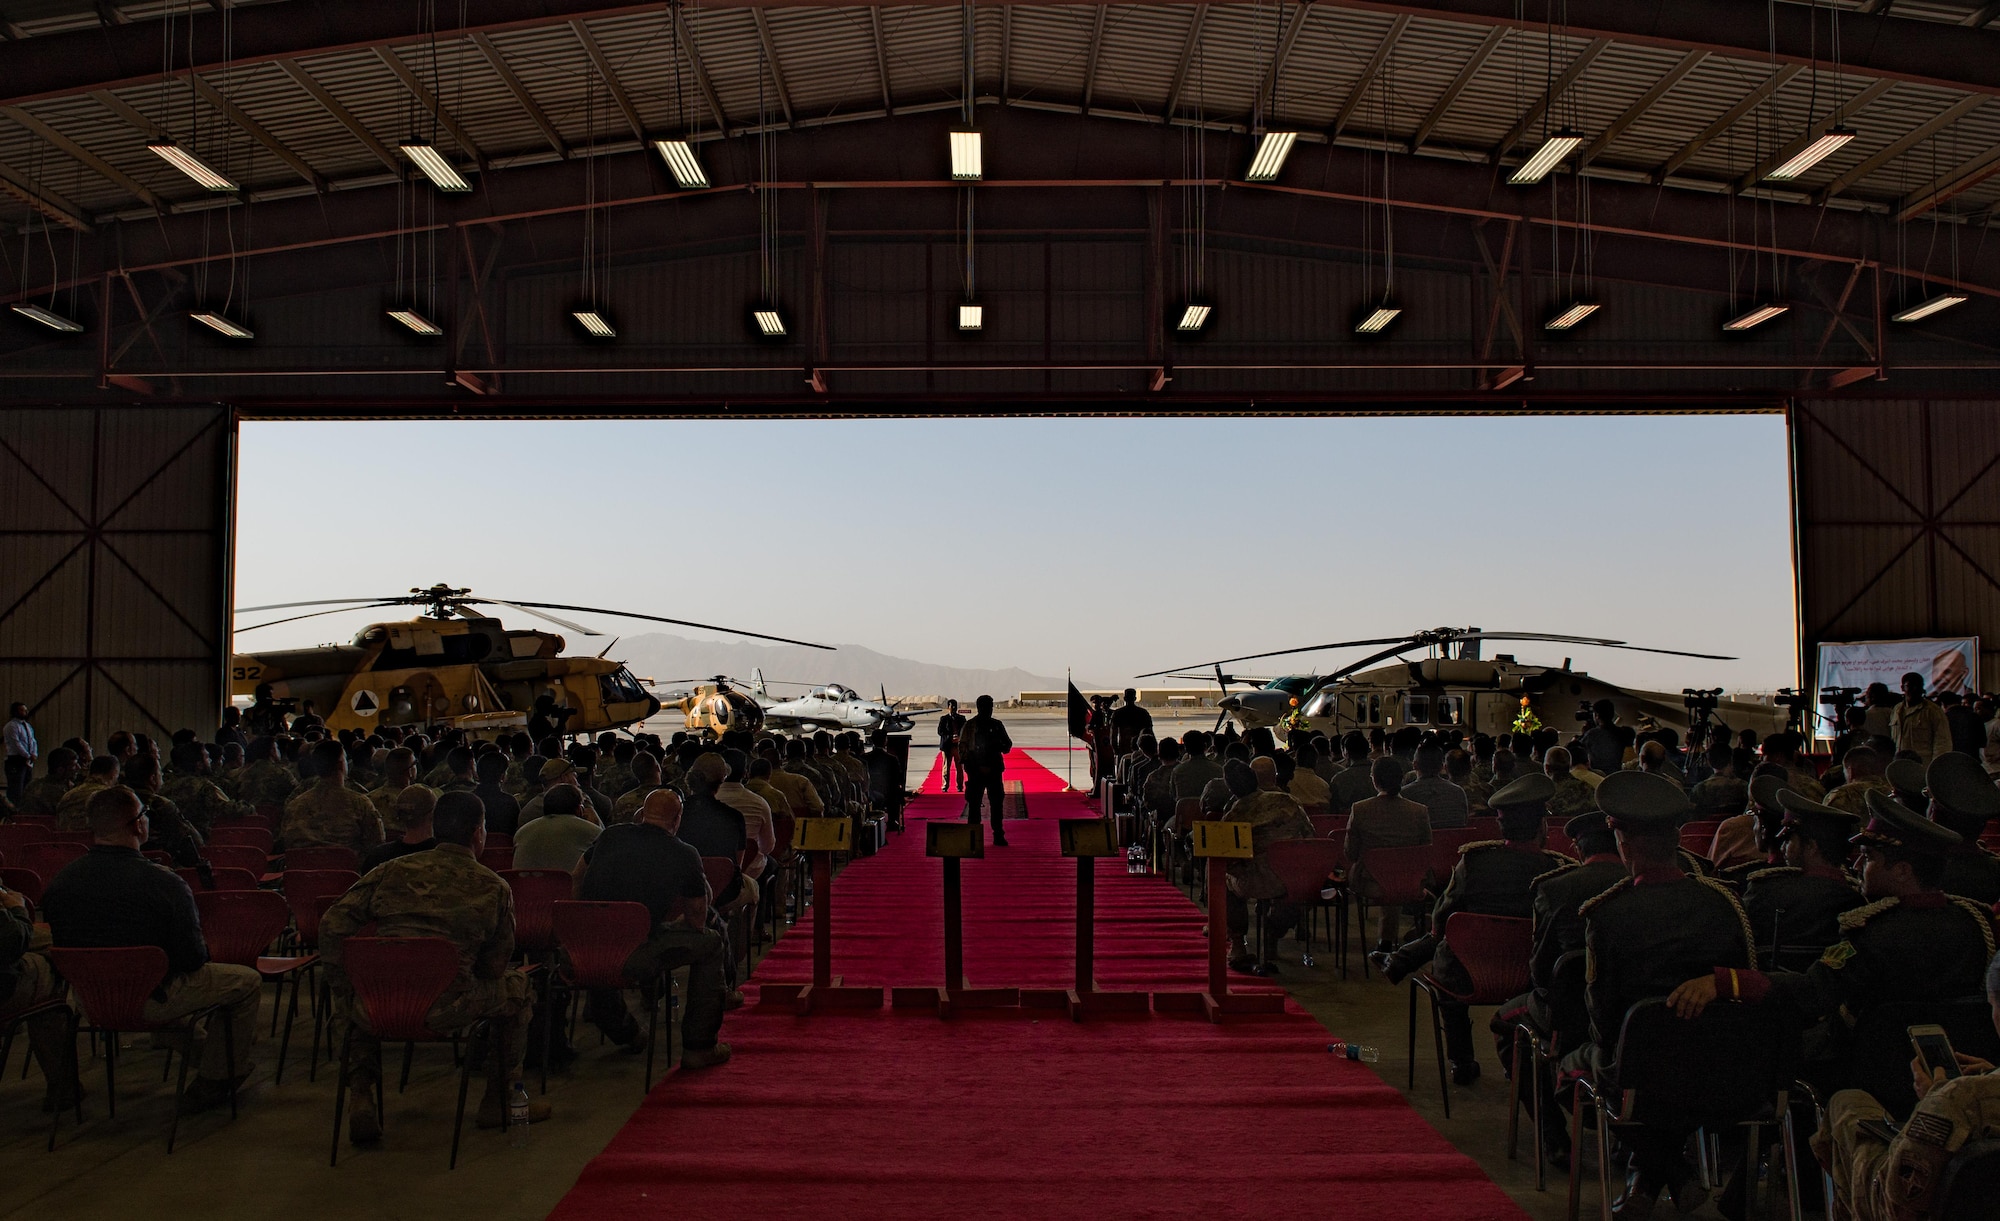 Afghanistan President Ashraf Ghani speaks during the official UH-60 Black Hawk arrival ceremony, Oct. 7, 2017, at Kandahar Airfield, Afghanistan. Ghani and U.S. Army Gen. John W. Nicholson, commander of the Resolute Support mission and U.S. Forces − Afghanistan, performed a ceremonial ribbon cutting celebrating the newest addition to Afghanistan’s air force fleet, while vowing continued commitment to the fight against the anti-government insurgency in Afghanistan. (U.S. Air Force photo by Staff Sgt. Alexander W. Riedel)